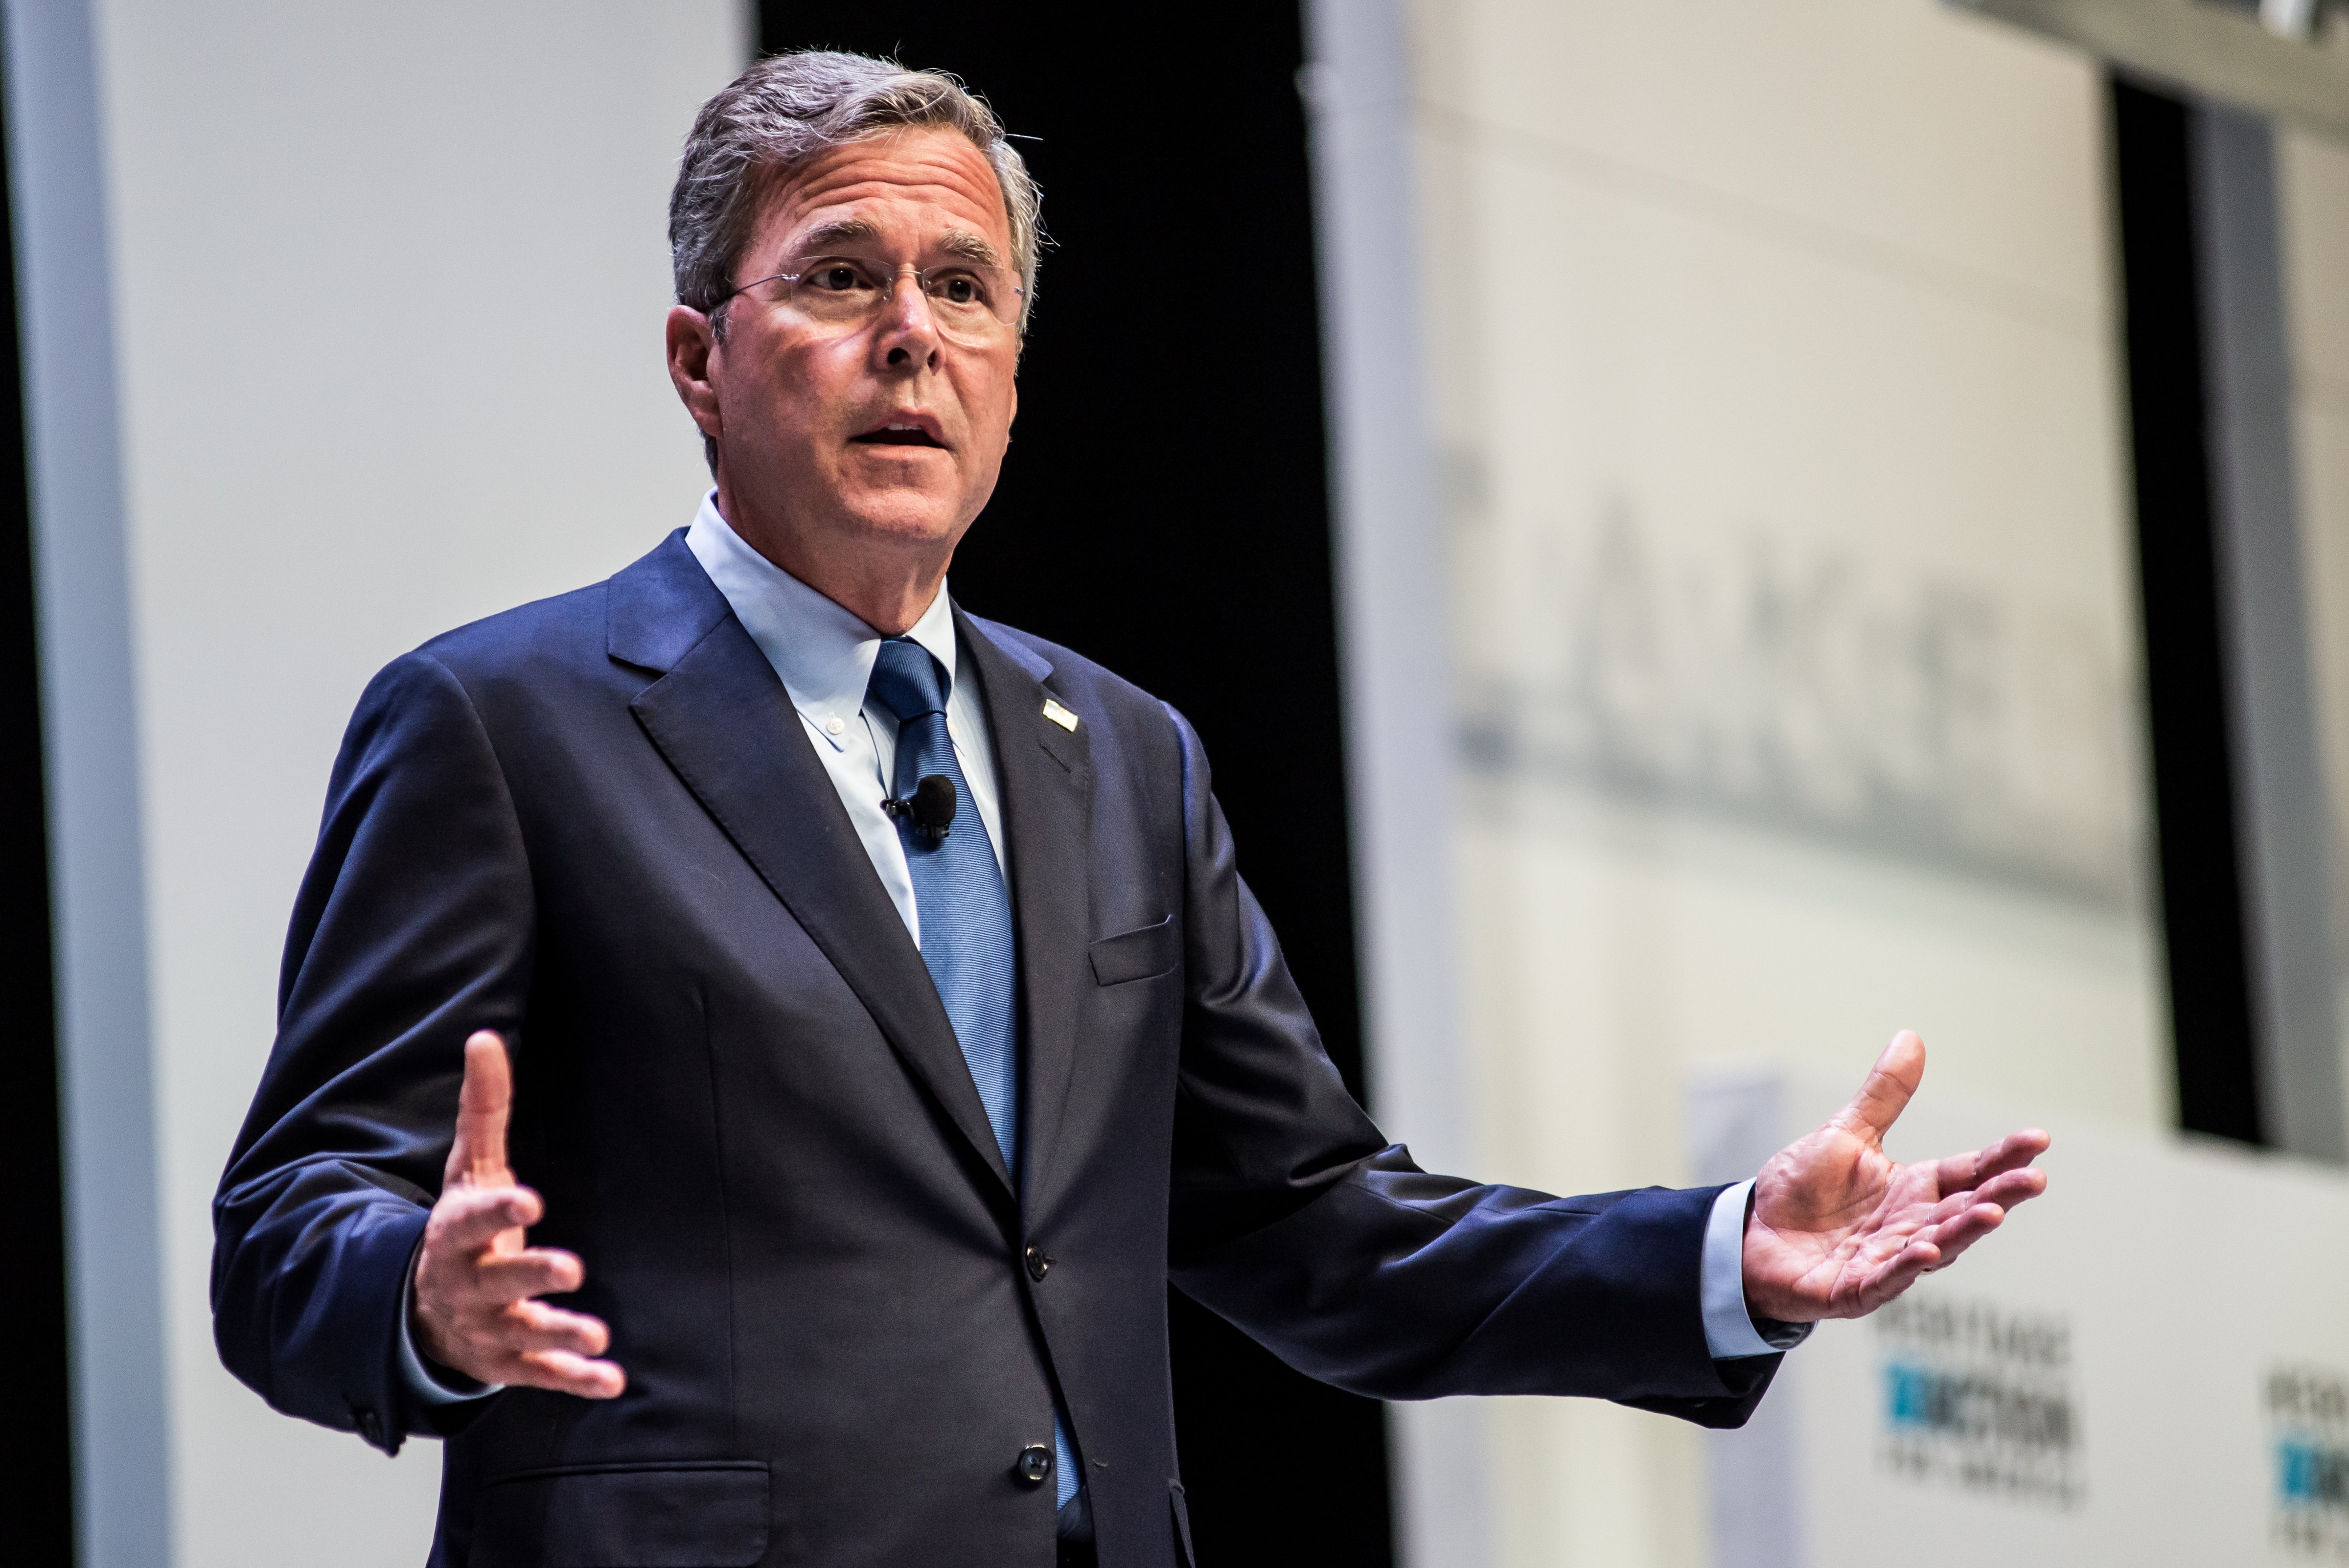 Jeb Bush speaks to voters at the Heritage Action Presidential Candidate Forum on Sept. 18, 2015 in Greenville, South Carolina. (Sean Rayford—Getty Images)